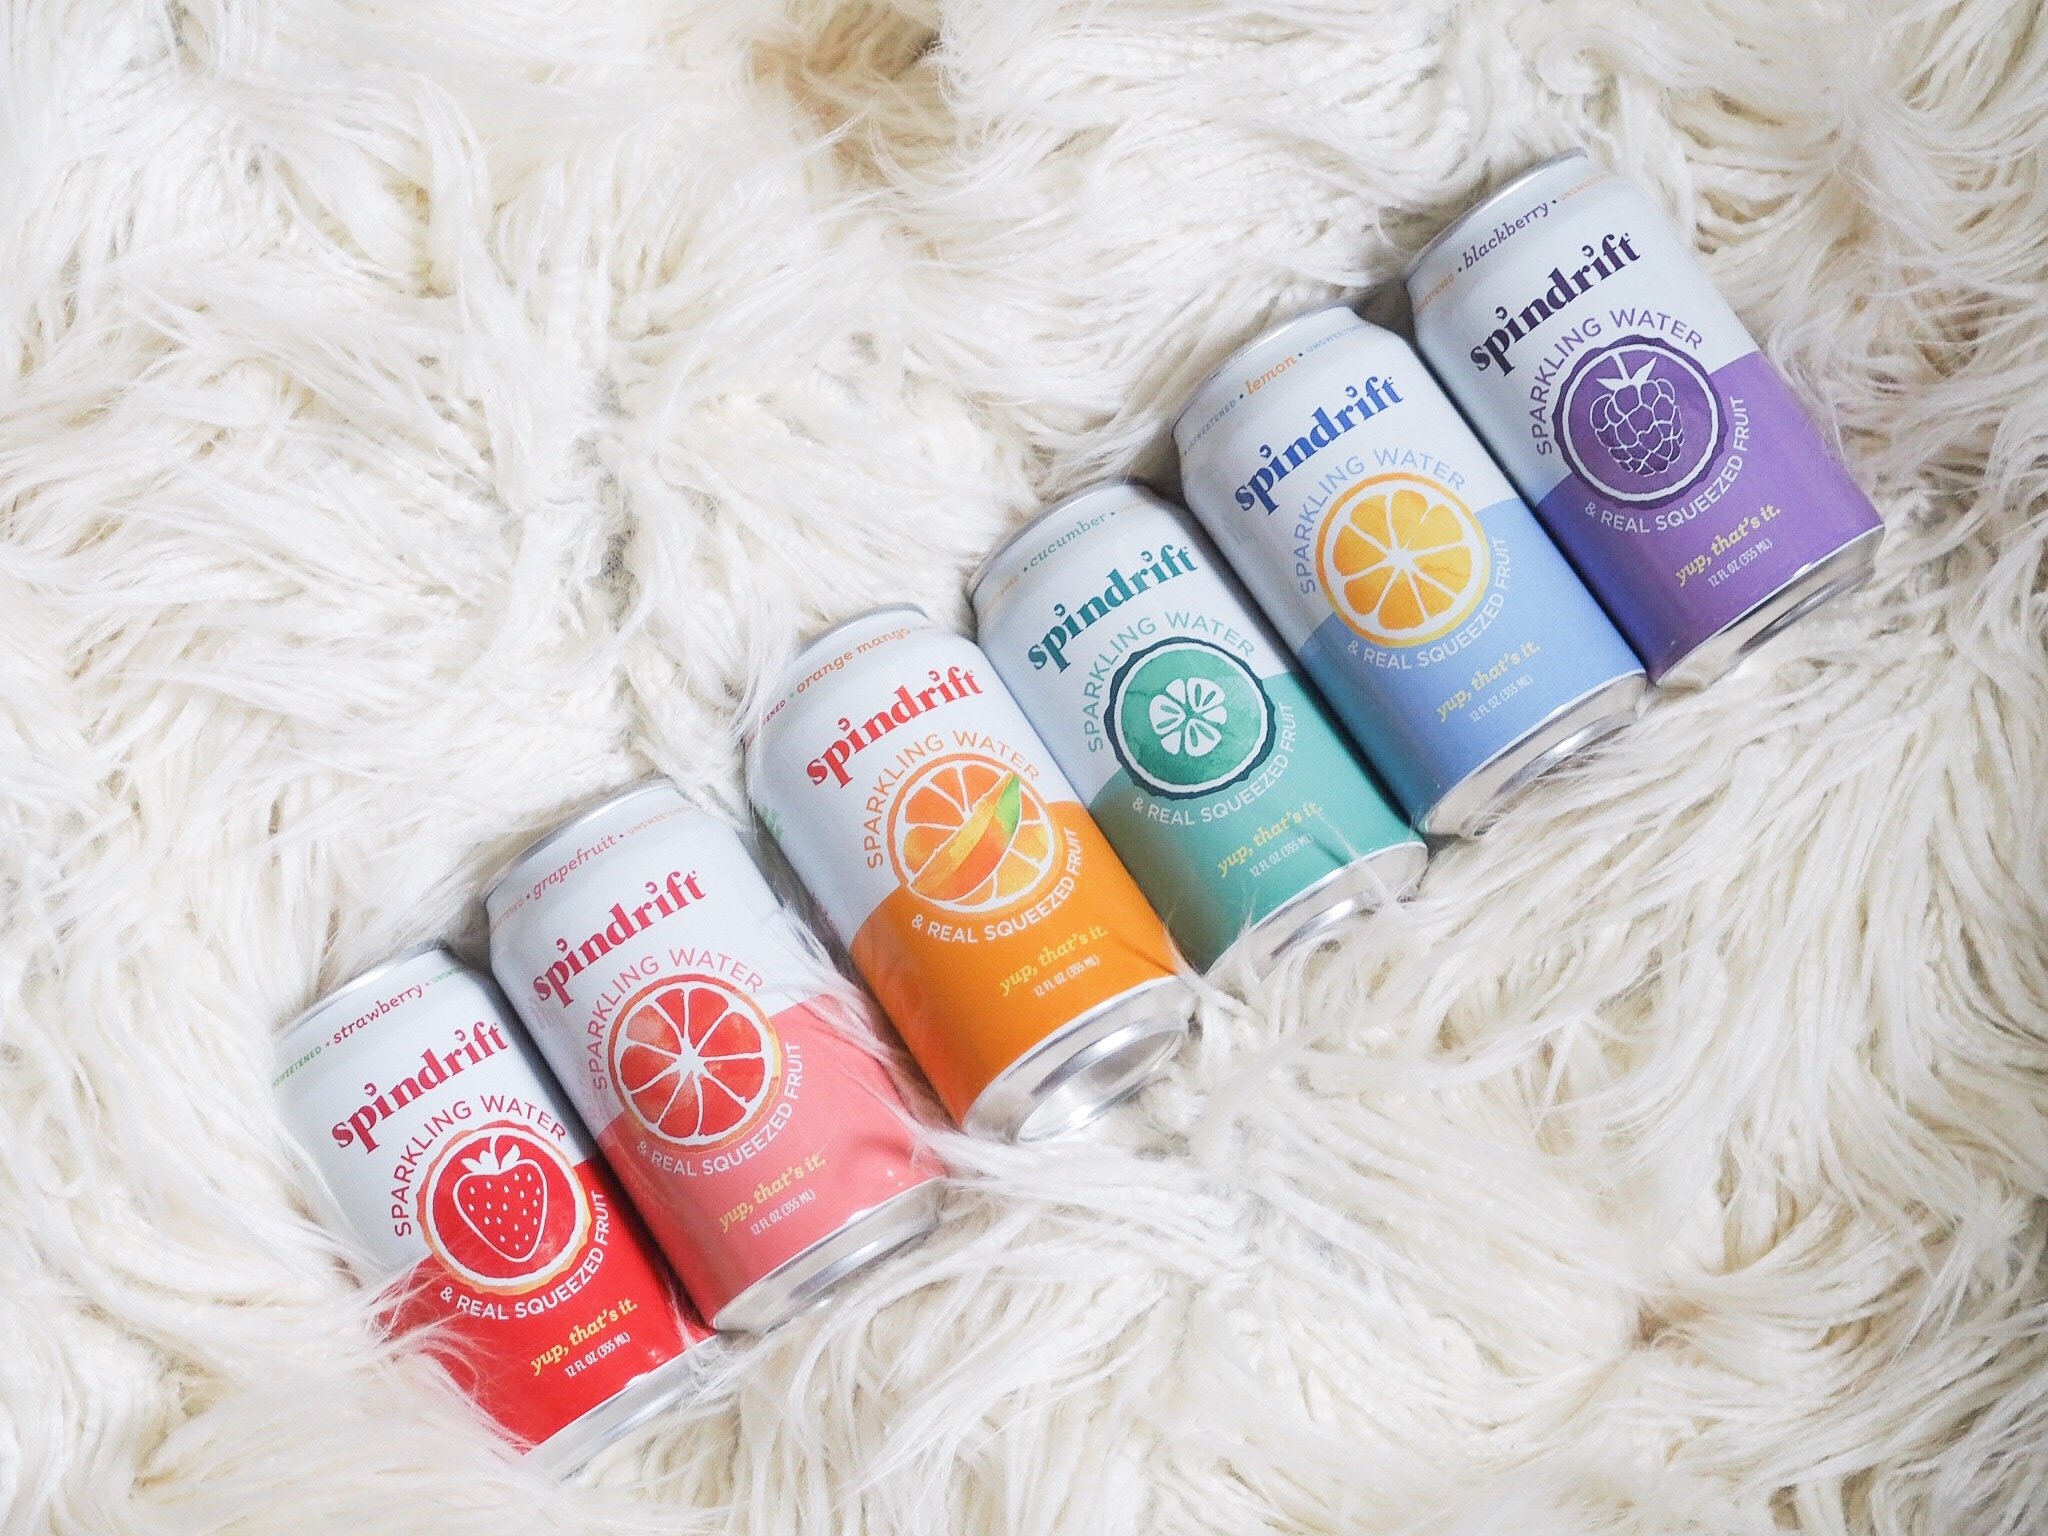 Kelsey of Blondes & Bagels talks staying refreshed and hydrated this summer with Spindrift sparkling water!